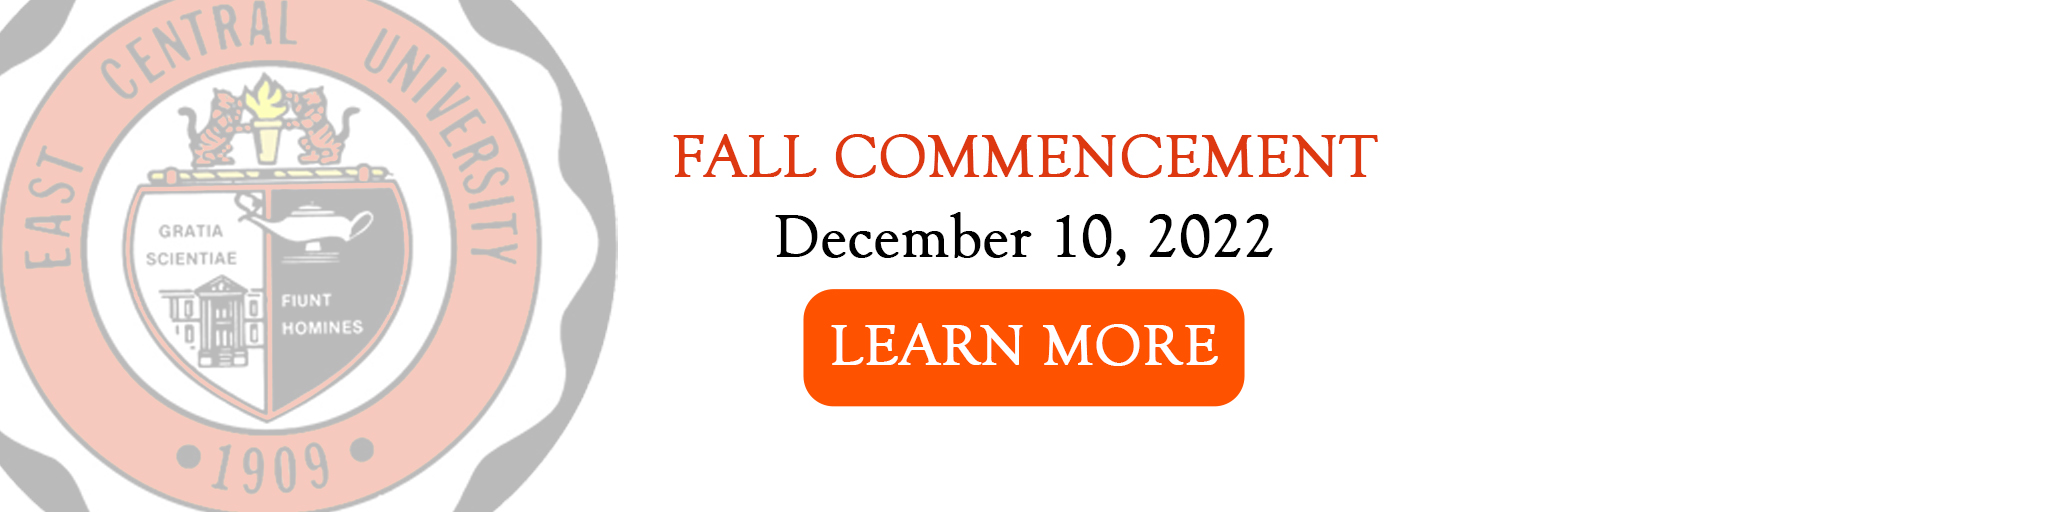 Commencement Slider and Link